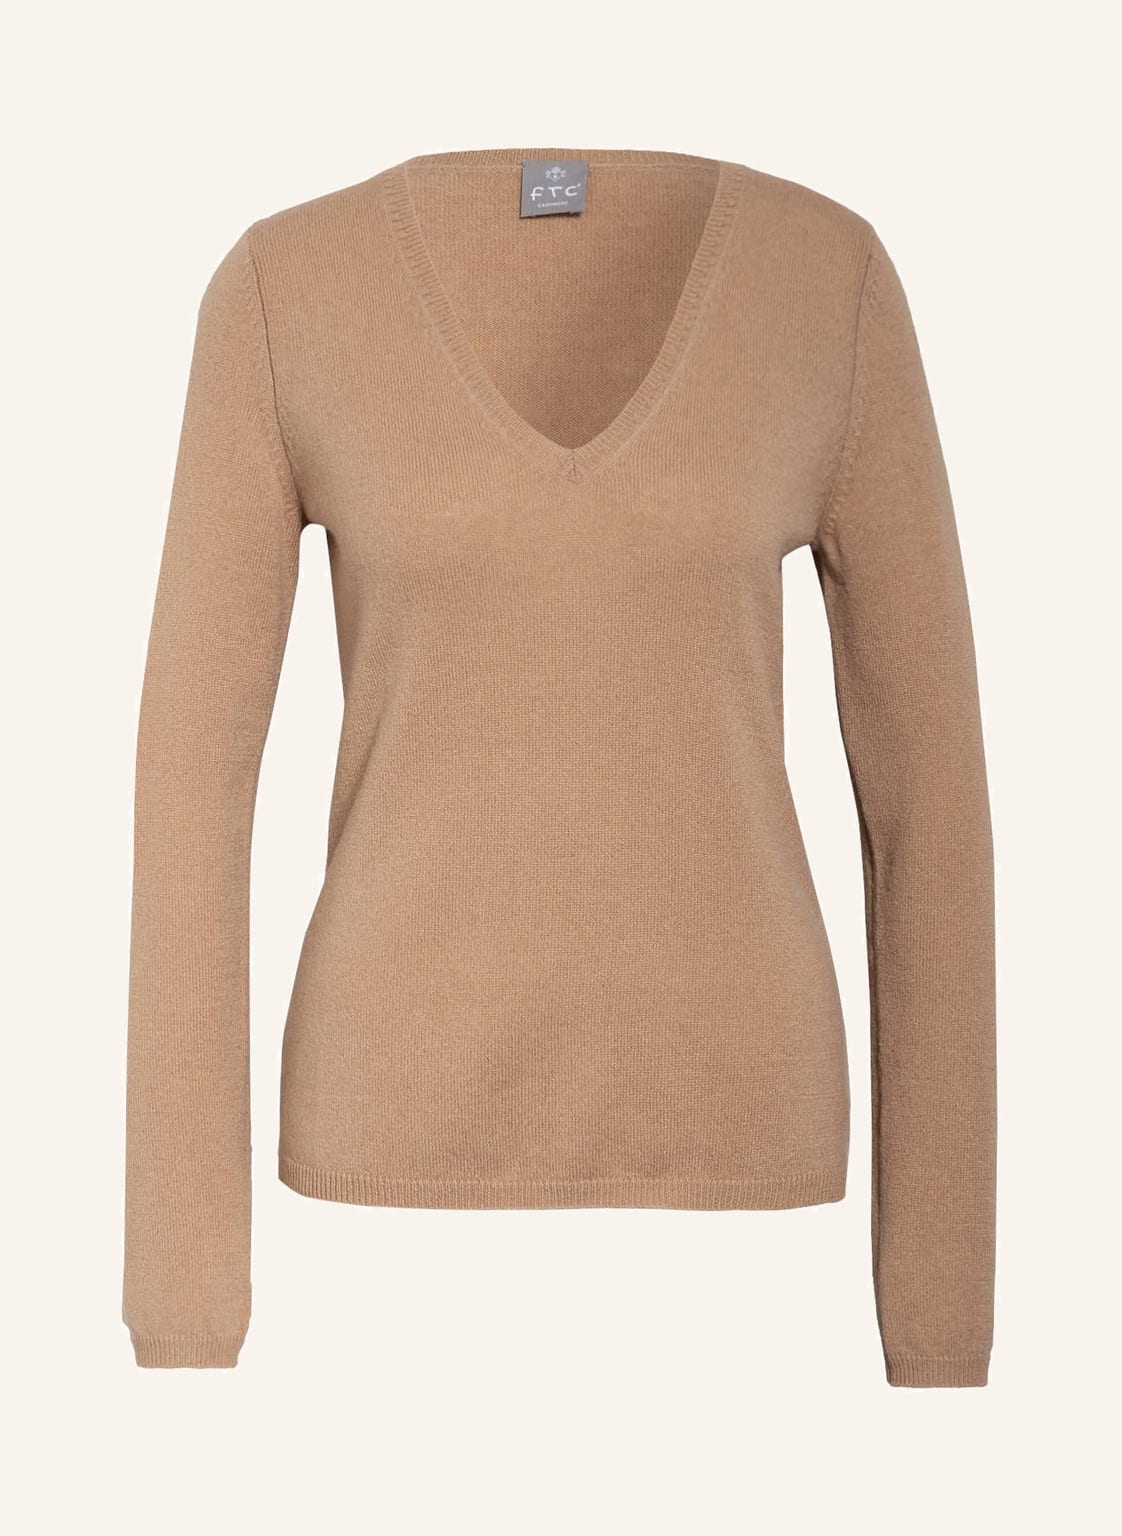 Image of Ftc Cashmere Cashmere-Pullover braun